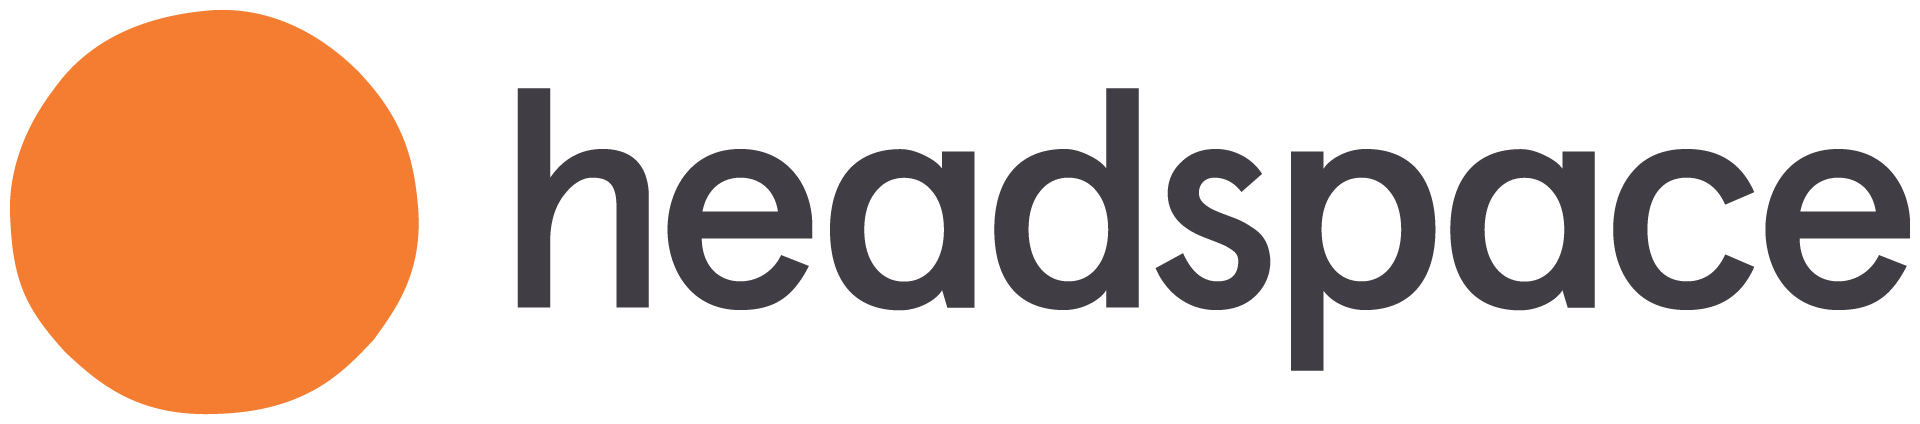 headspace_logo_primary